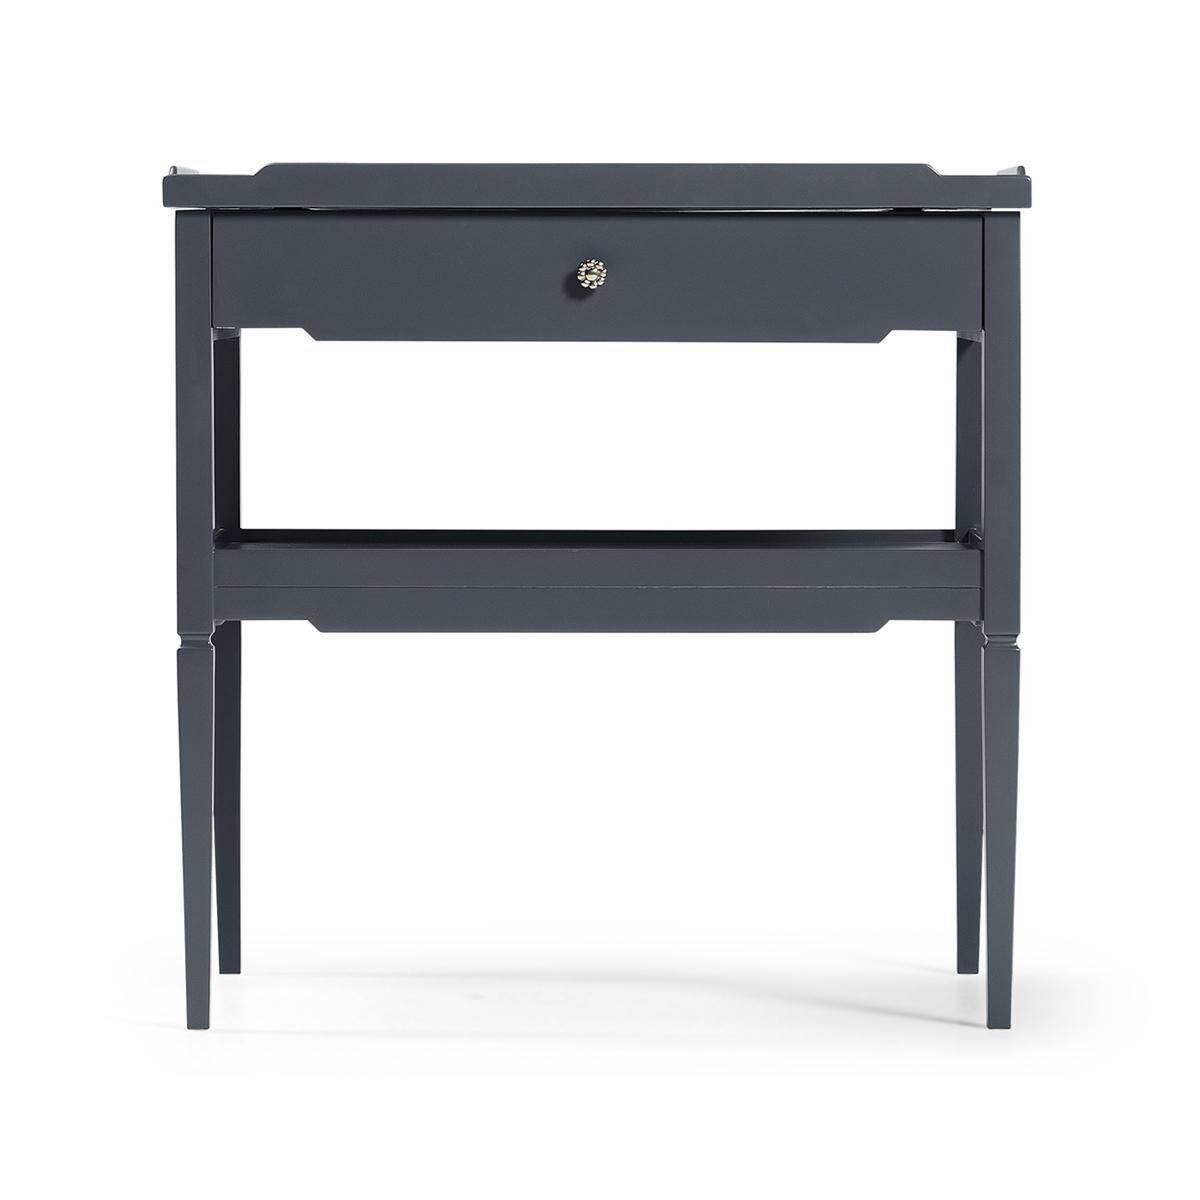 Modern painted side table with a hale navy lacquered finish, with a lipped top that doubles as a pull out tray, single drawer lined with a zany blue and white print, power supply access and cord management and a lower shelf for oversized items.